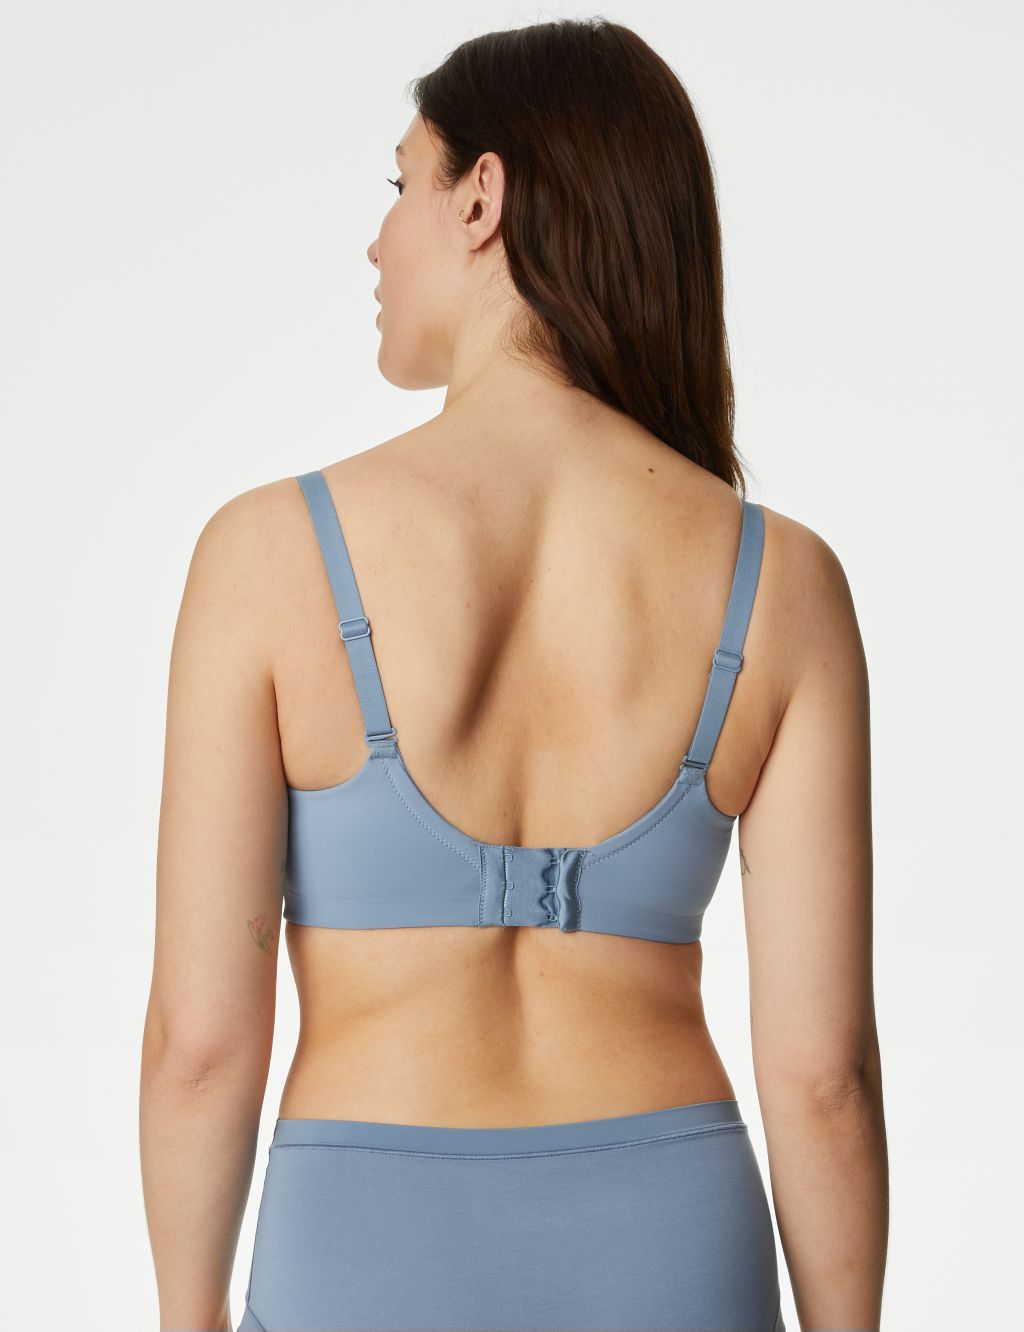 Flexifit™ Non-Wired Full Cup Bra F-H image 5